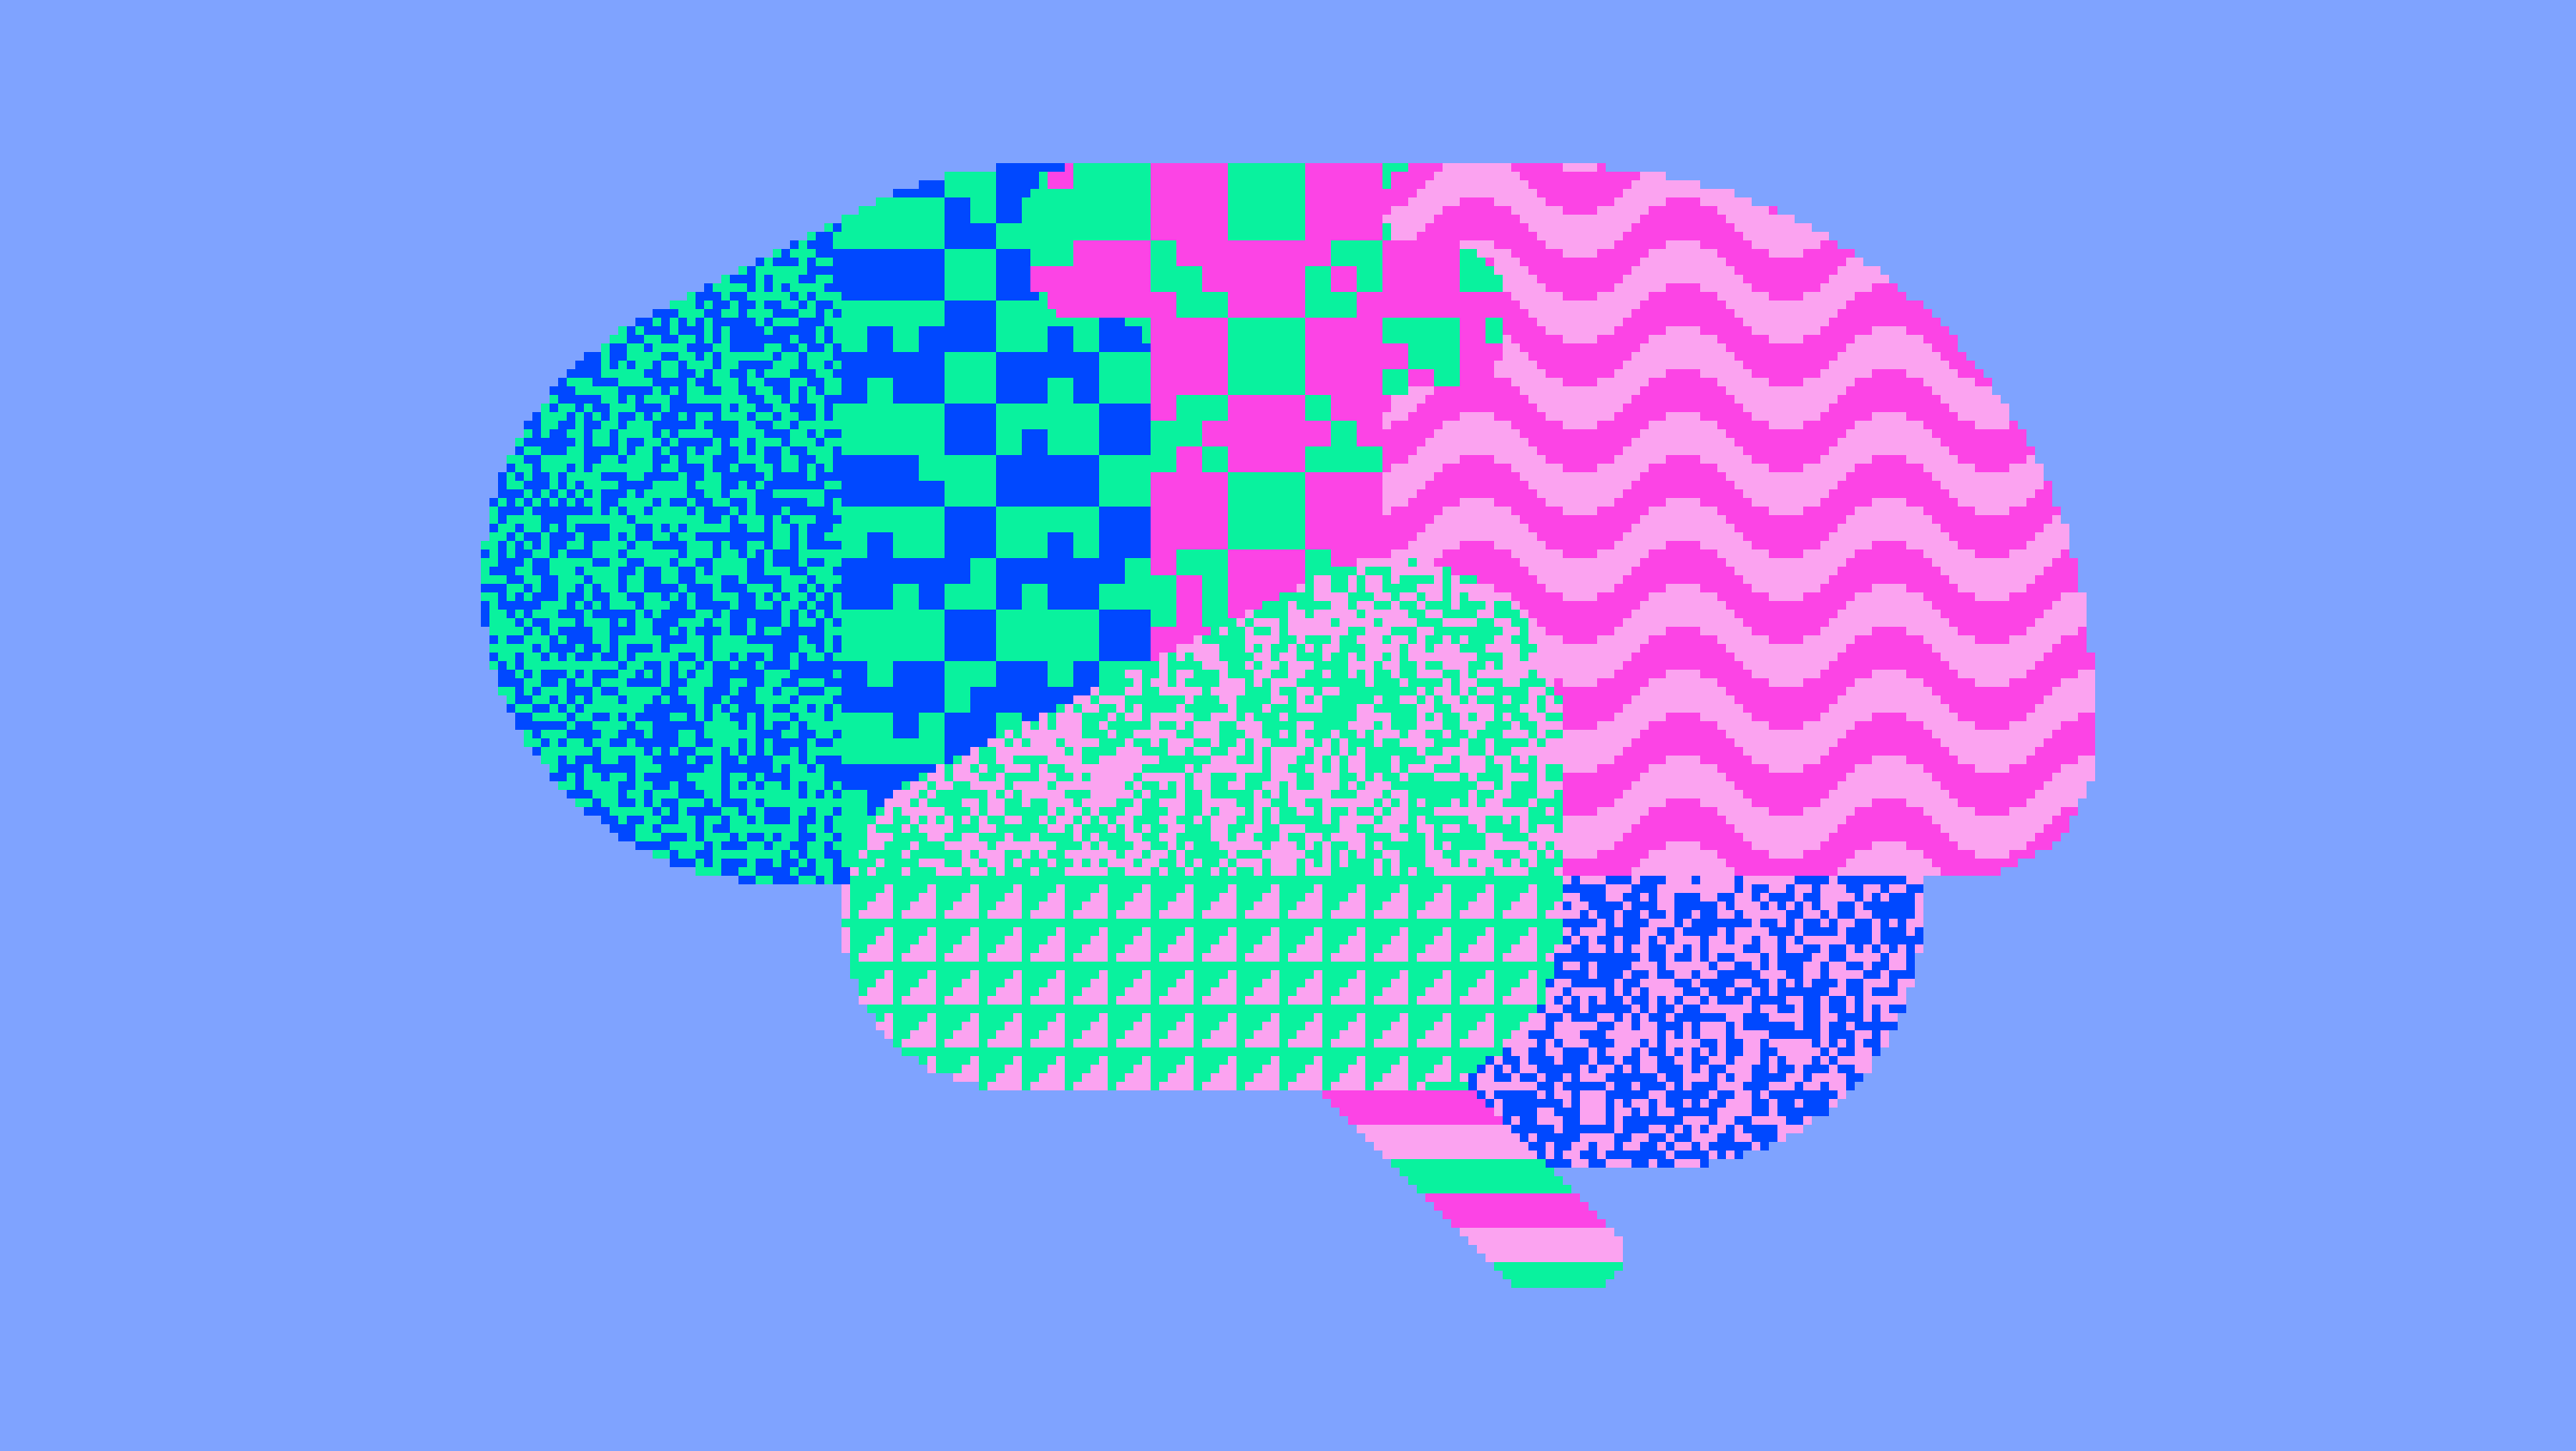 A conceptual illustration of brain waves and speech